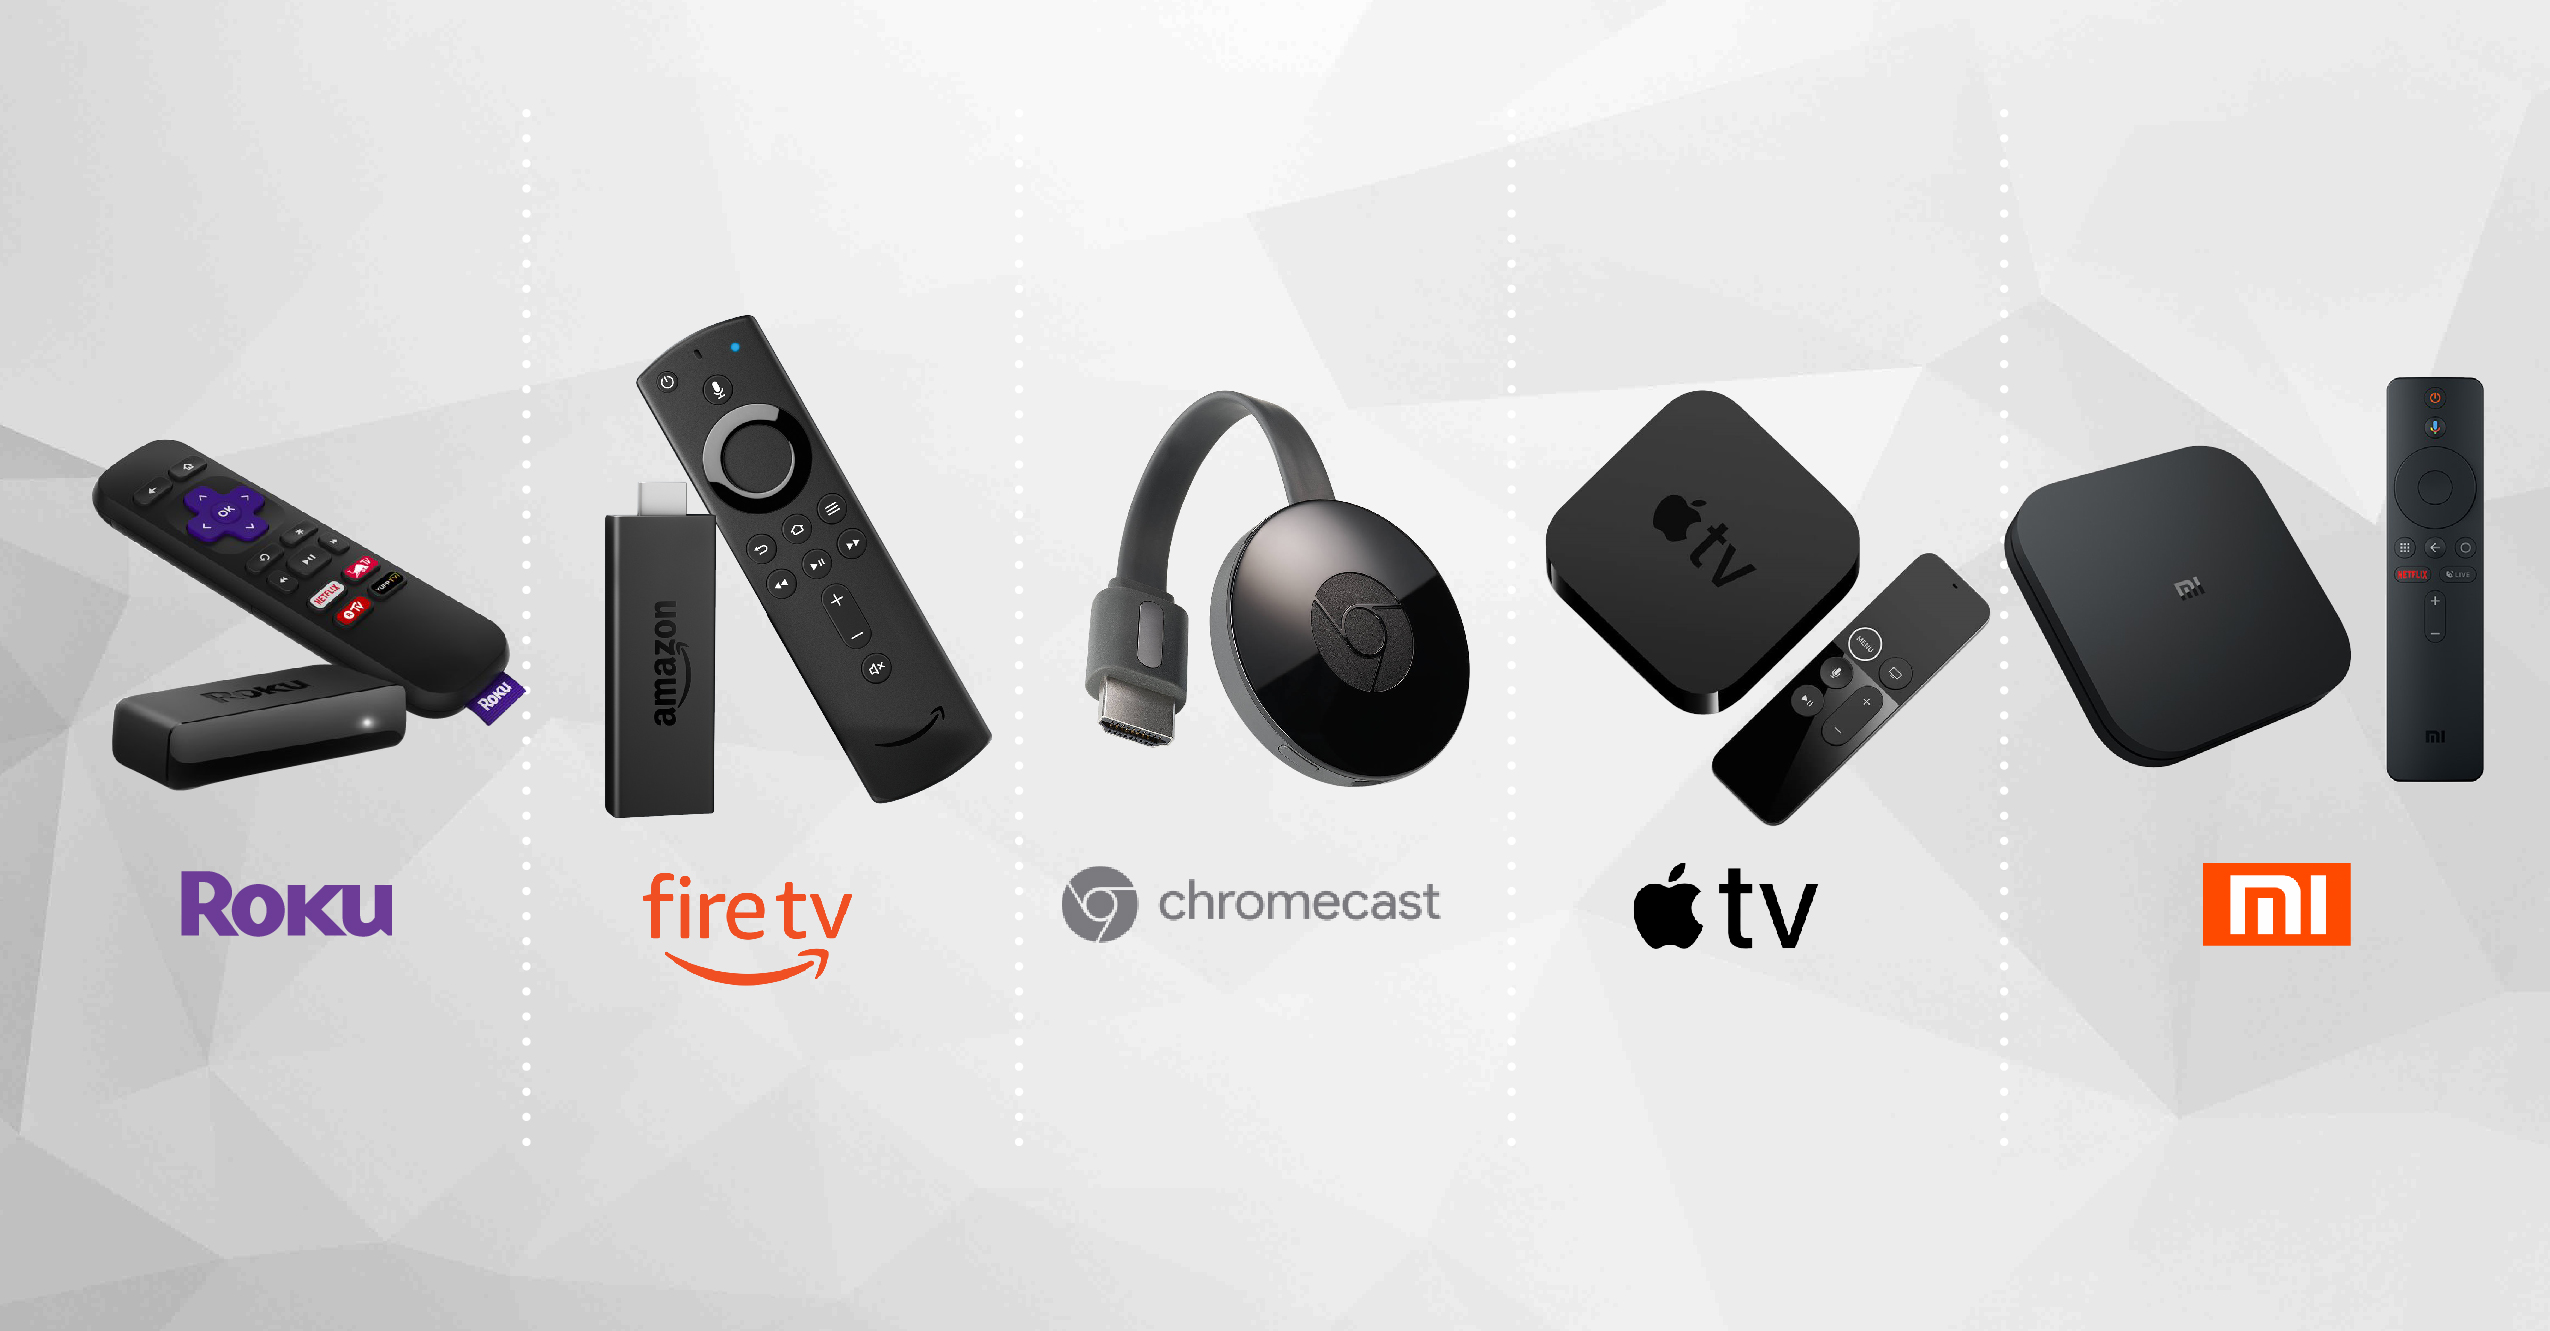 Chromecast vs. Chromecast Ultra: Which one is right for you?